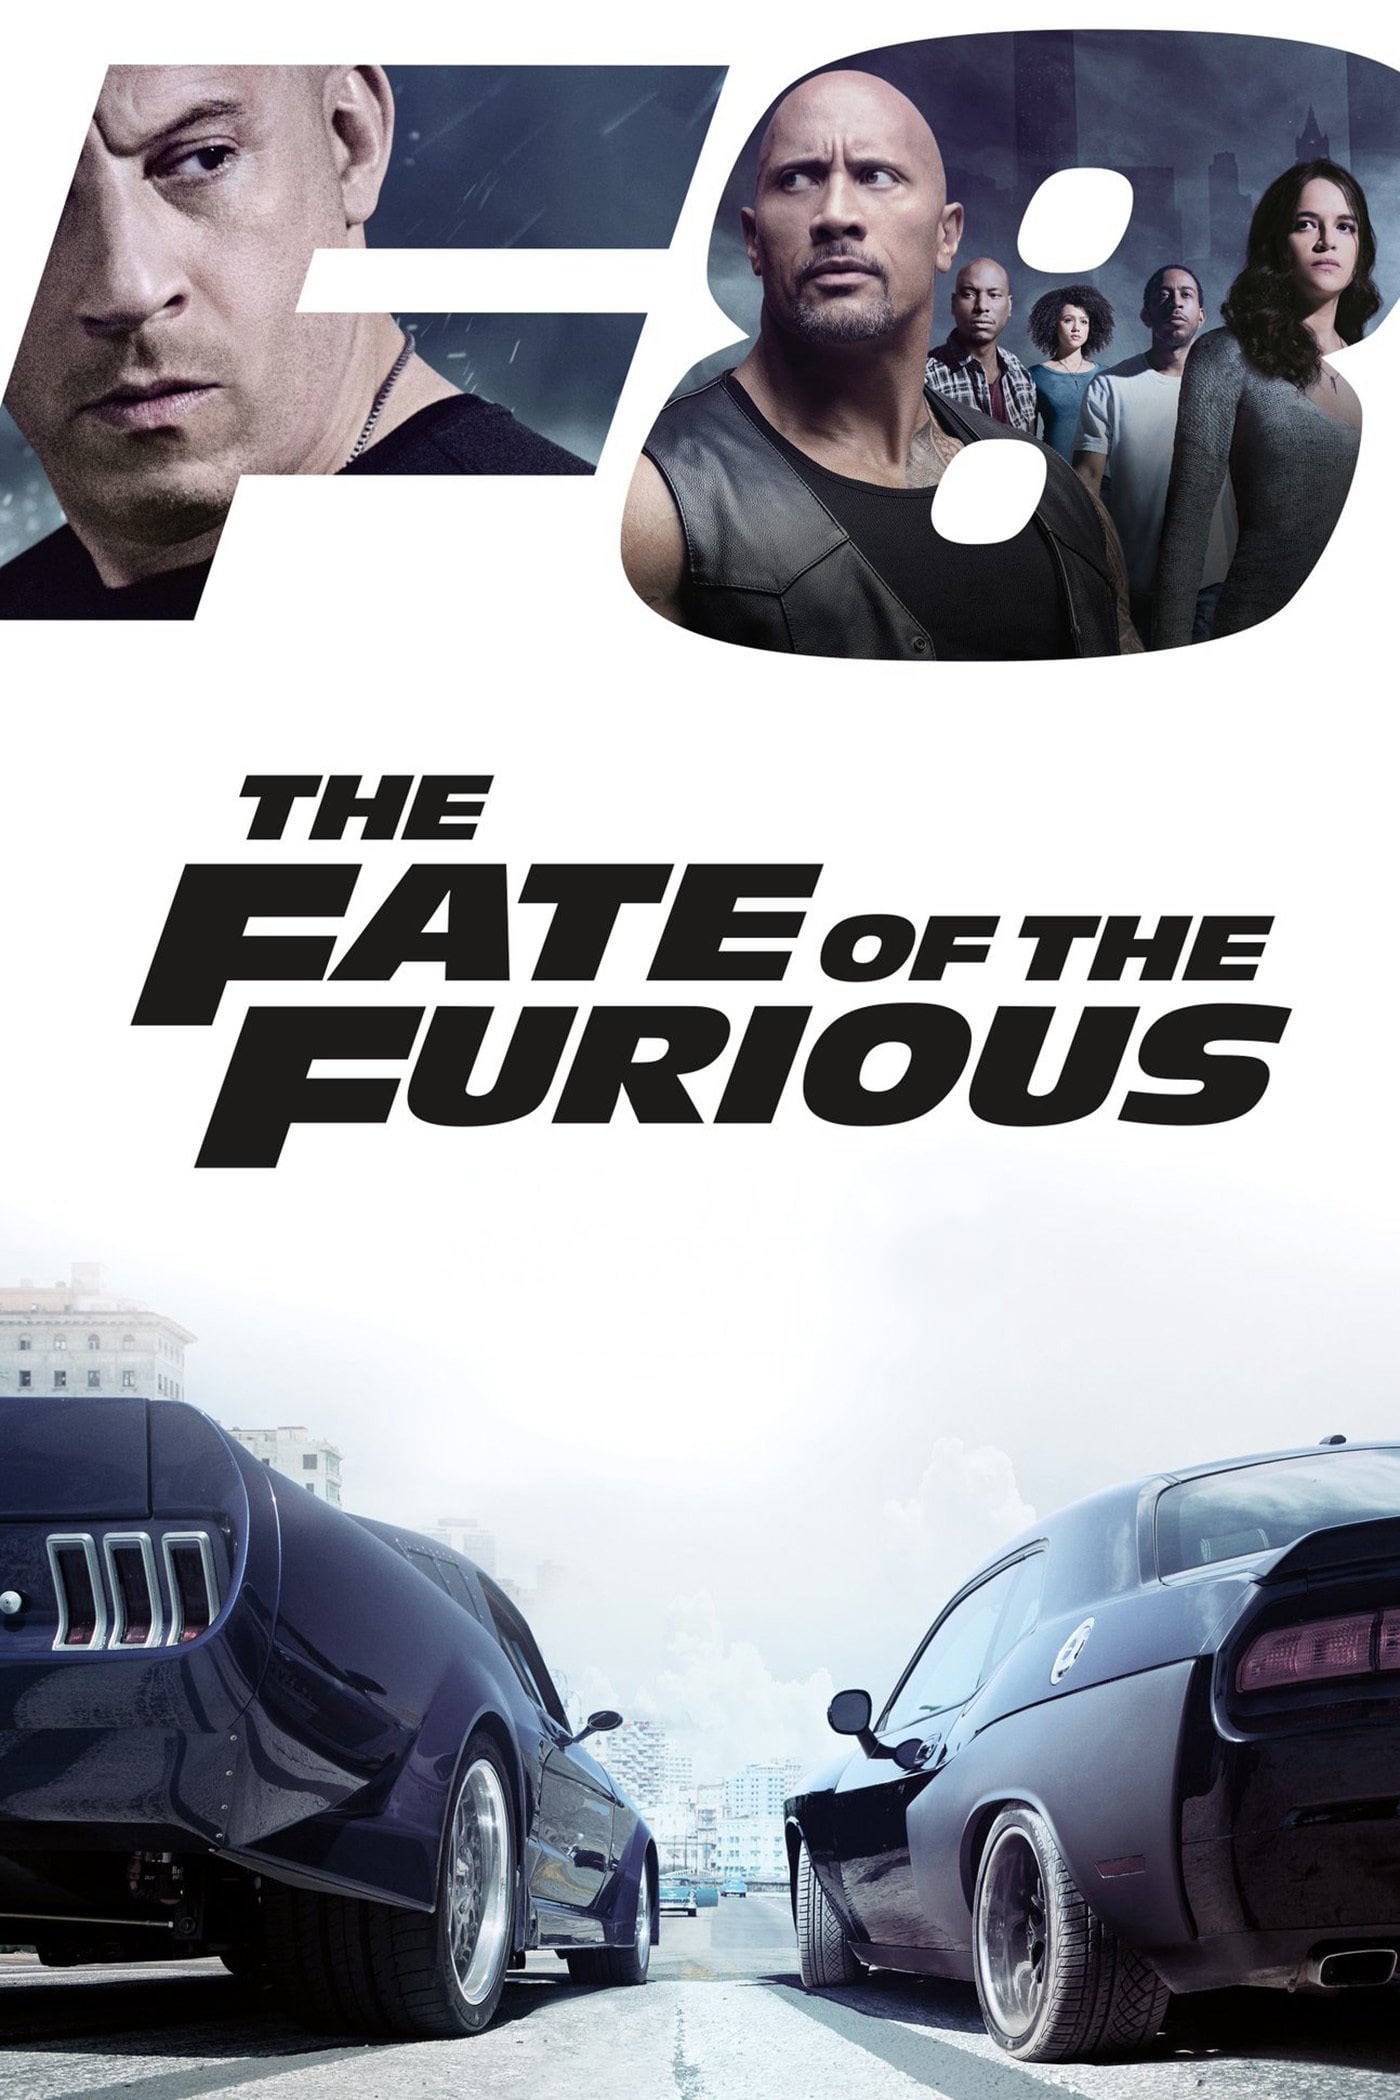 The Fate of the Furious (2017) REMASTERED